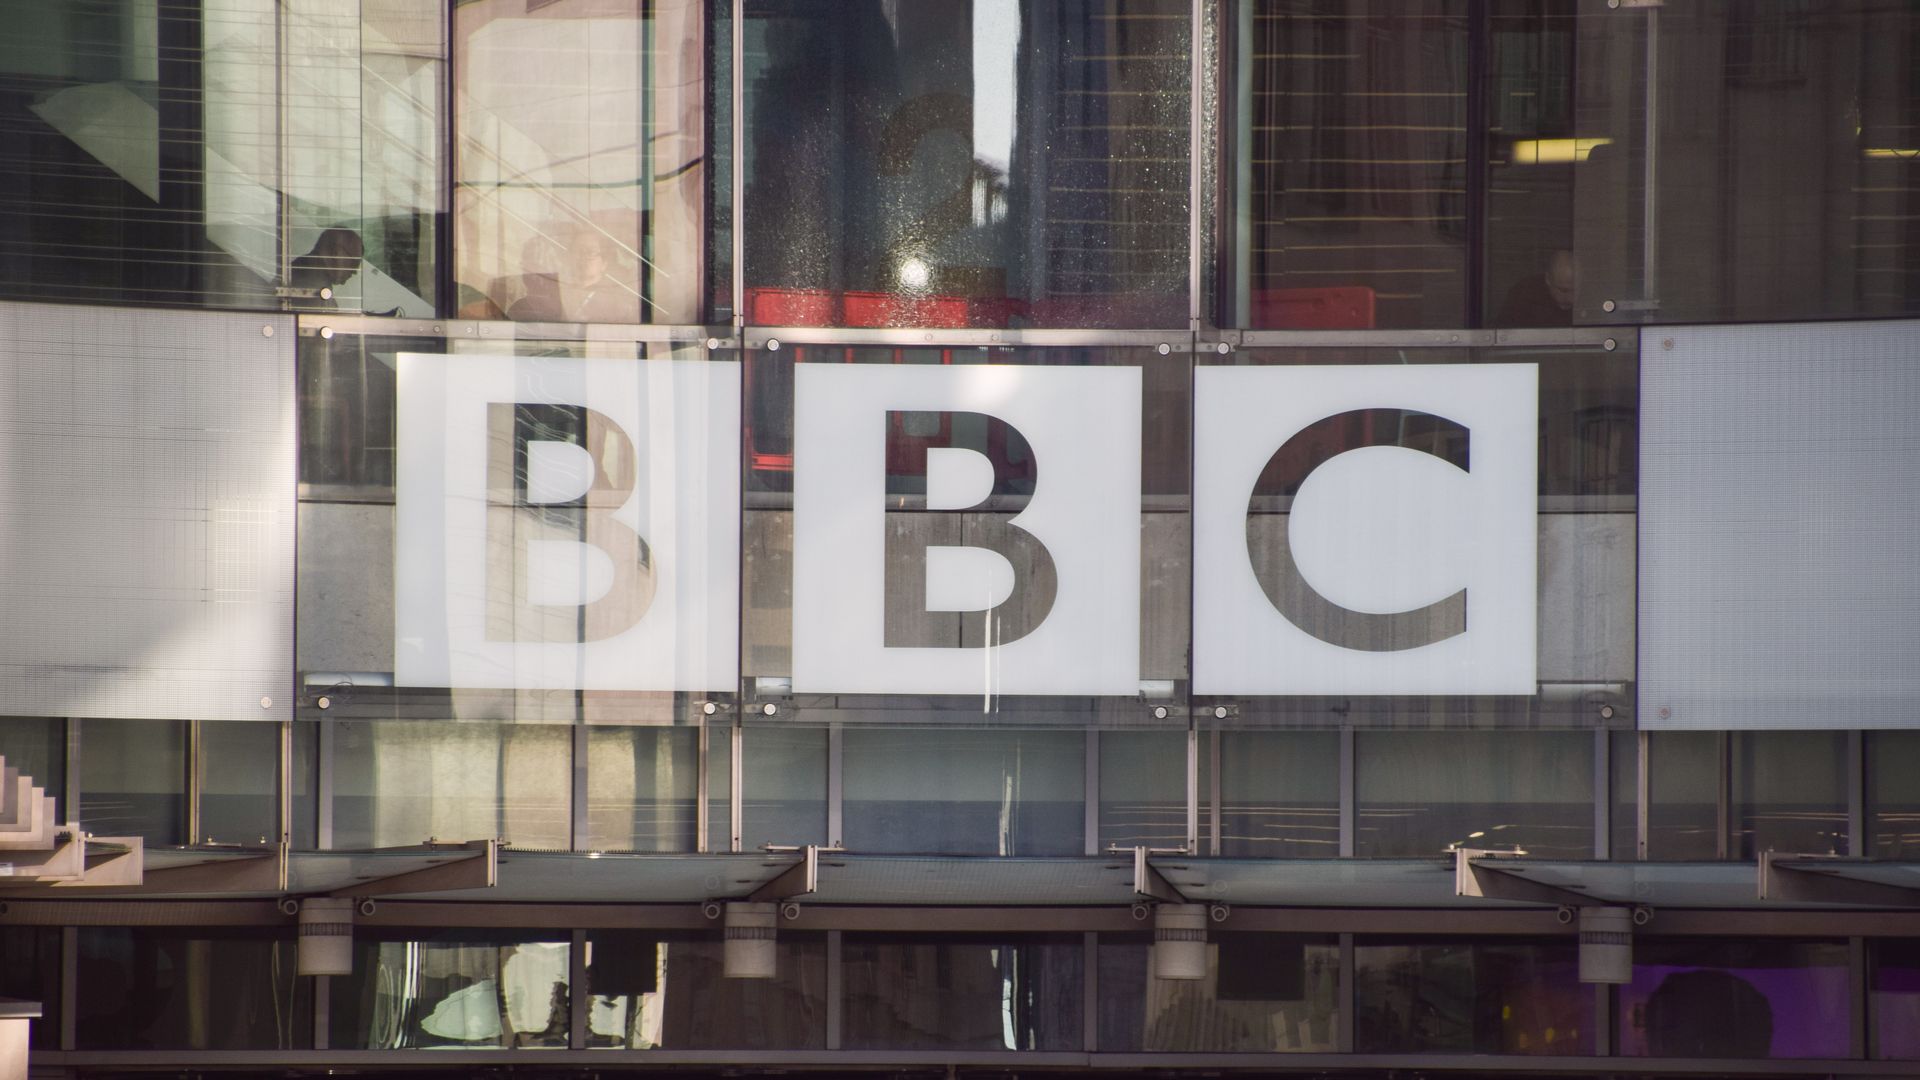 The BBC logo is seen at the entrance at Broadcasting House, the BBC headquarters in central London.